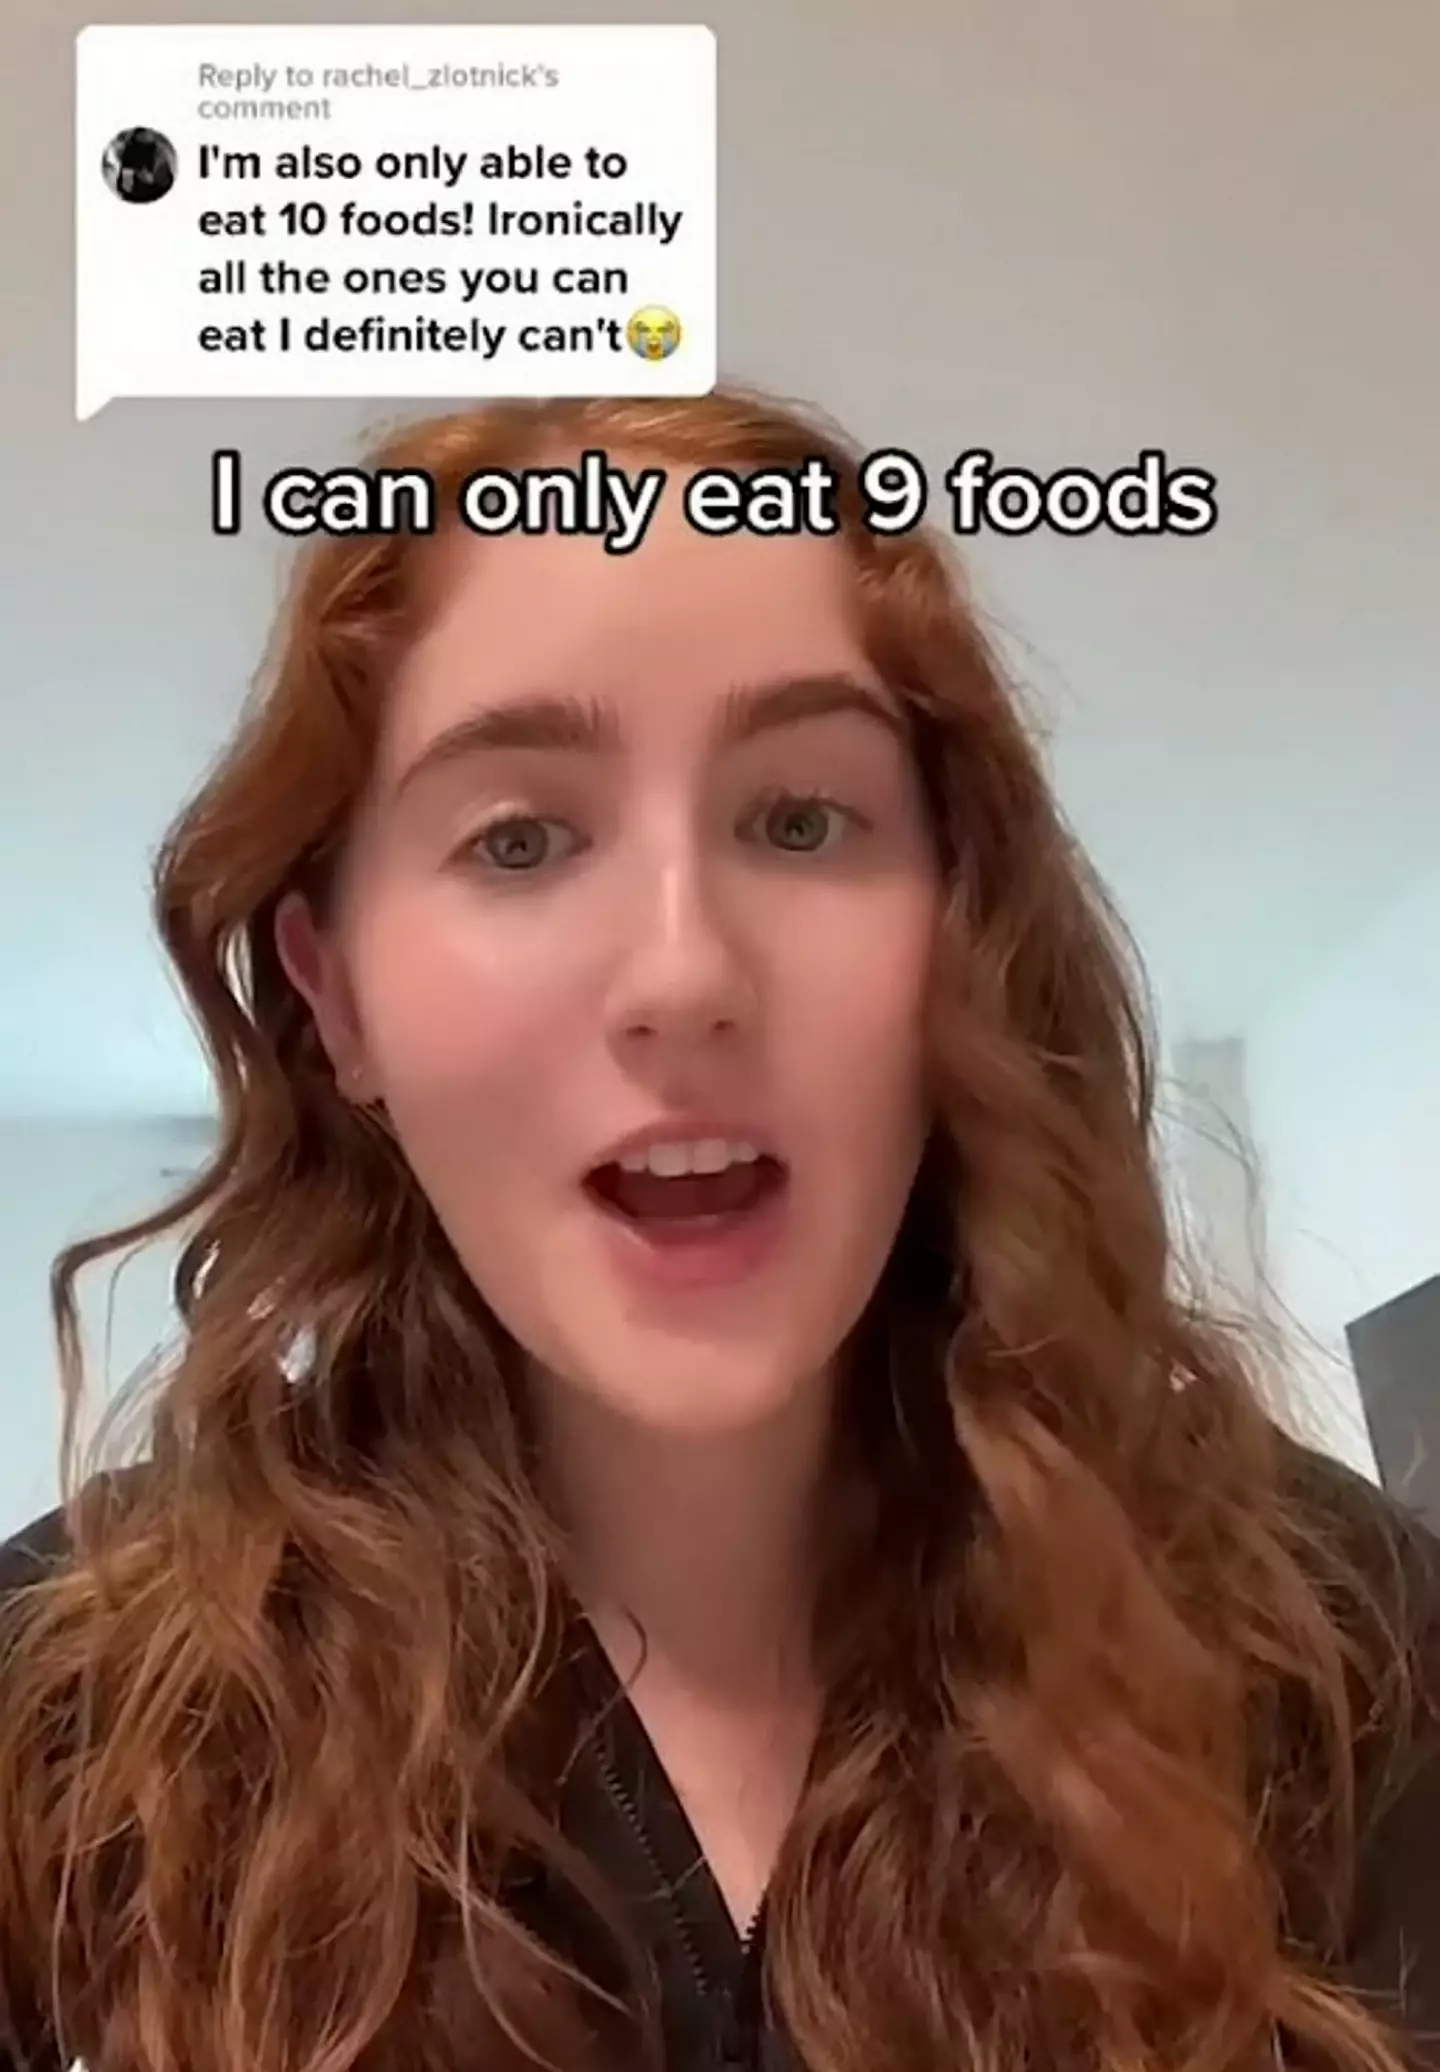 Jenna can only eat nine different foods.